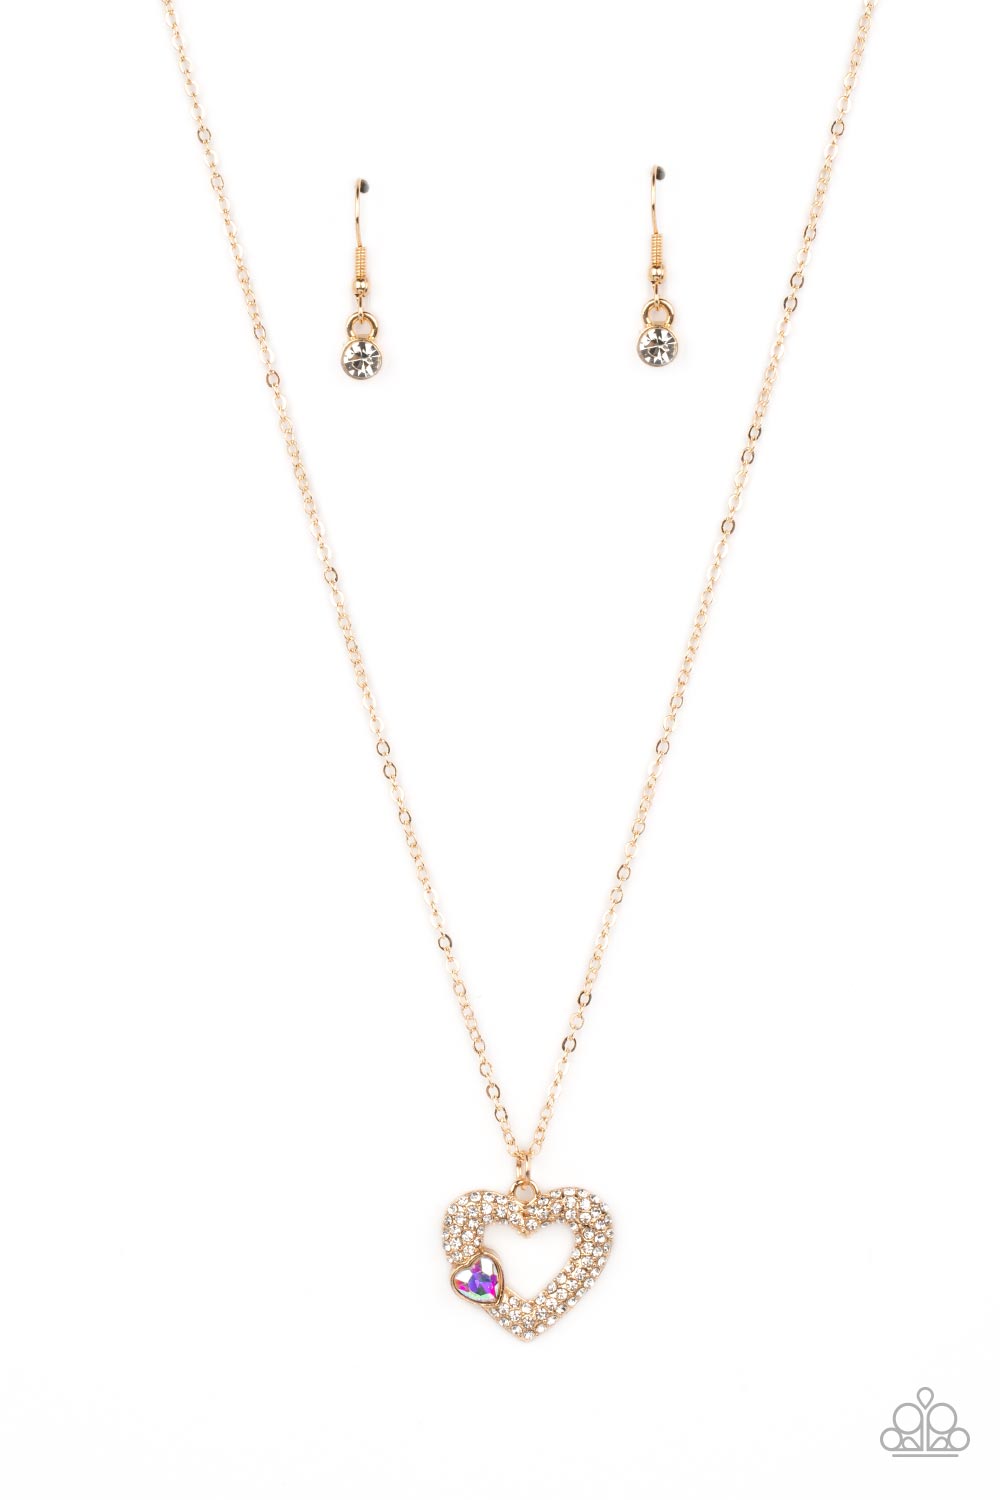 Bedazzled Bliss - Multi (Gold Heart/White Rhinestone) Necklace